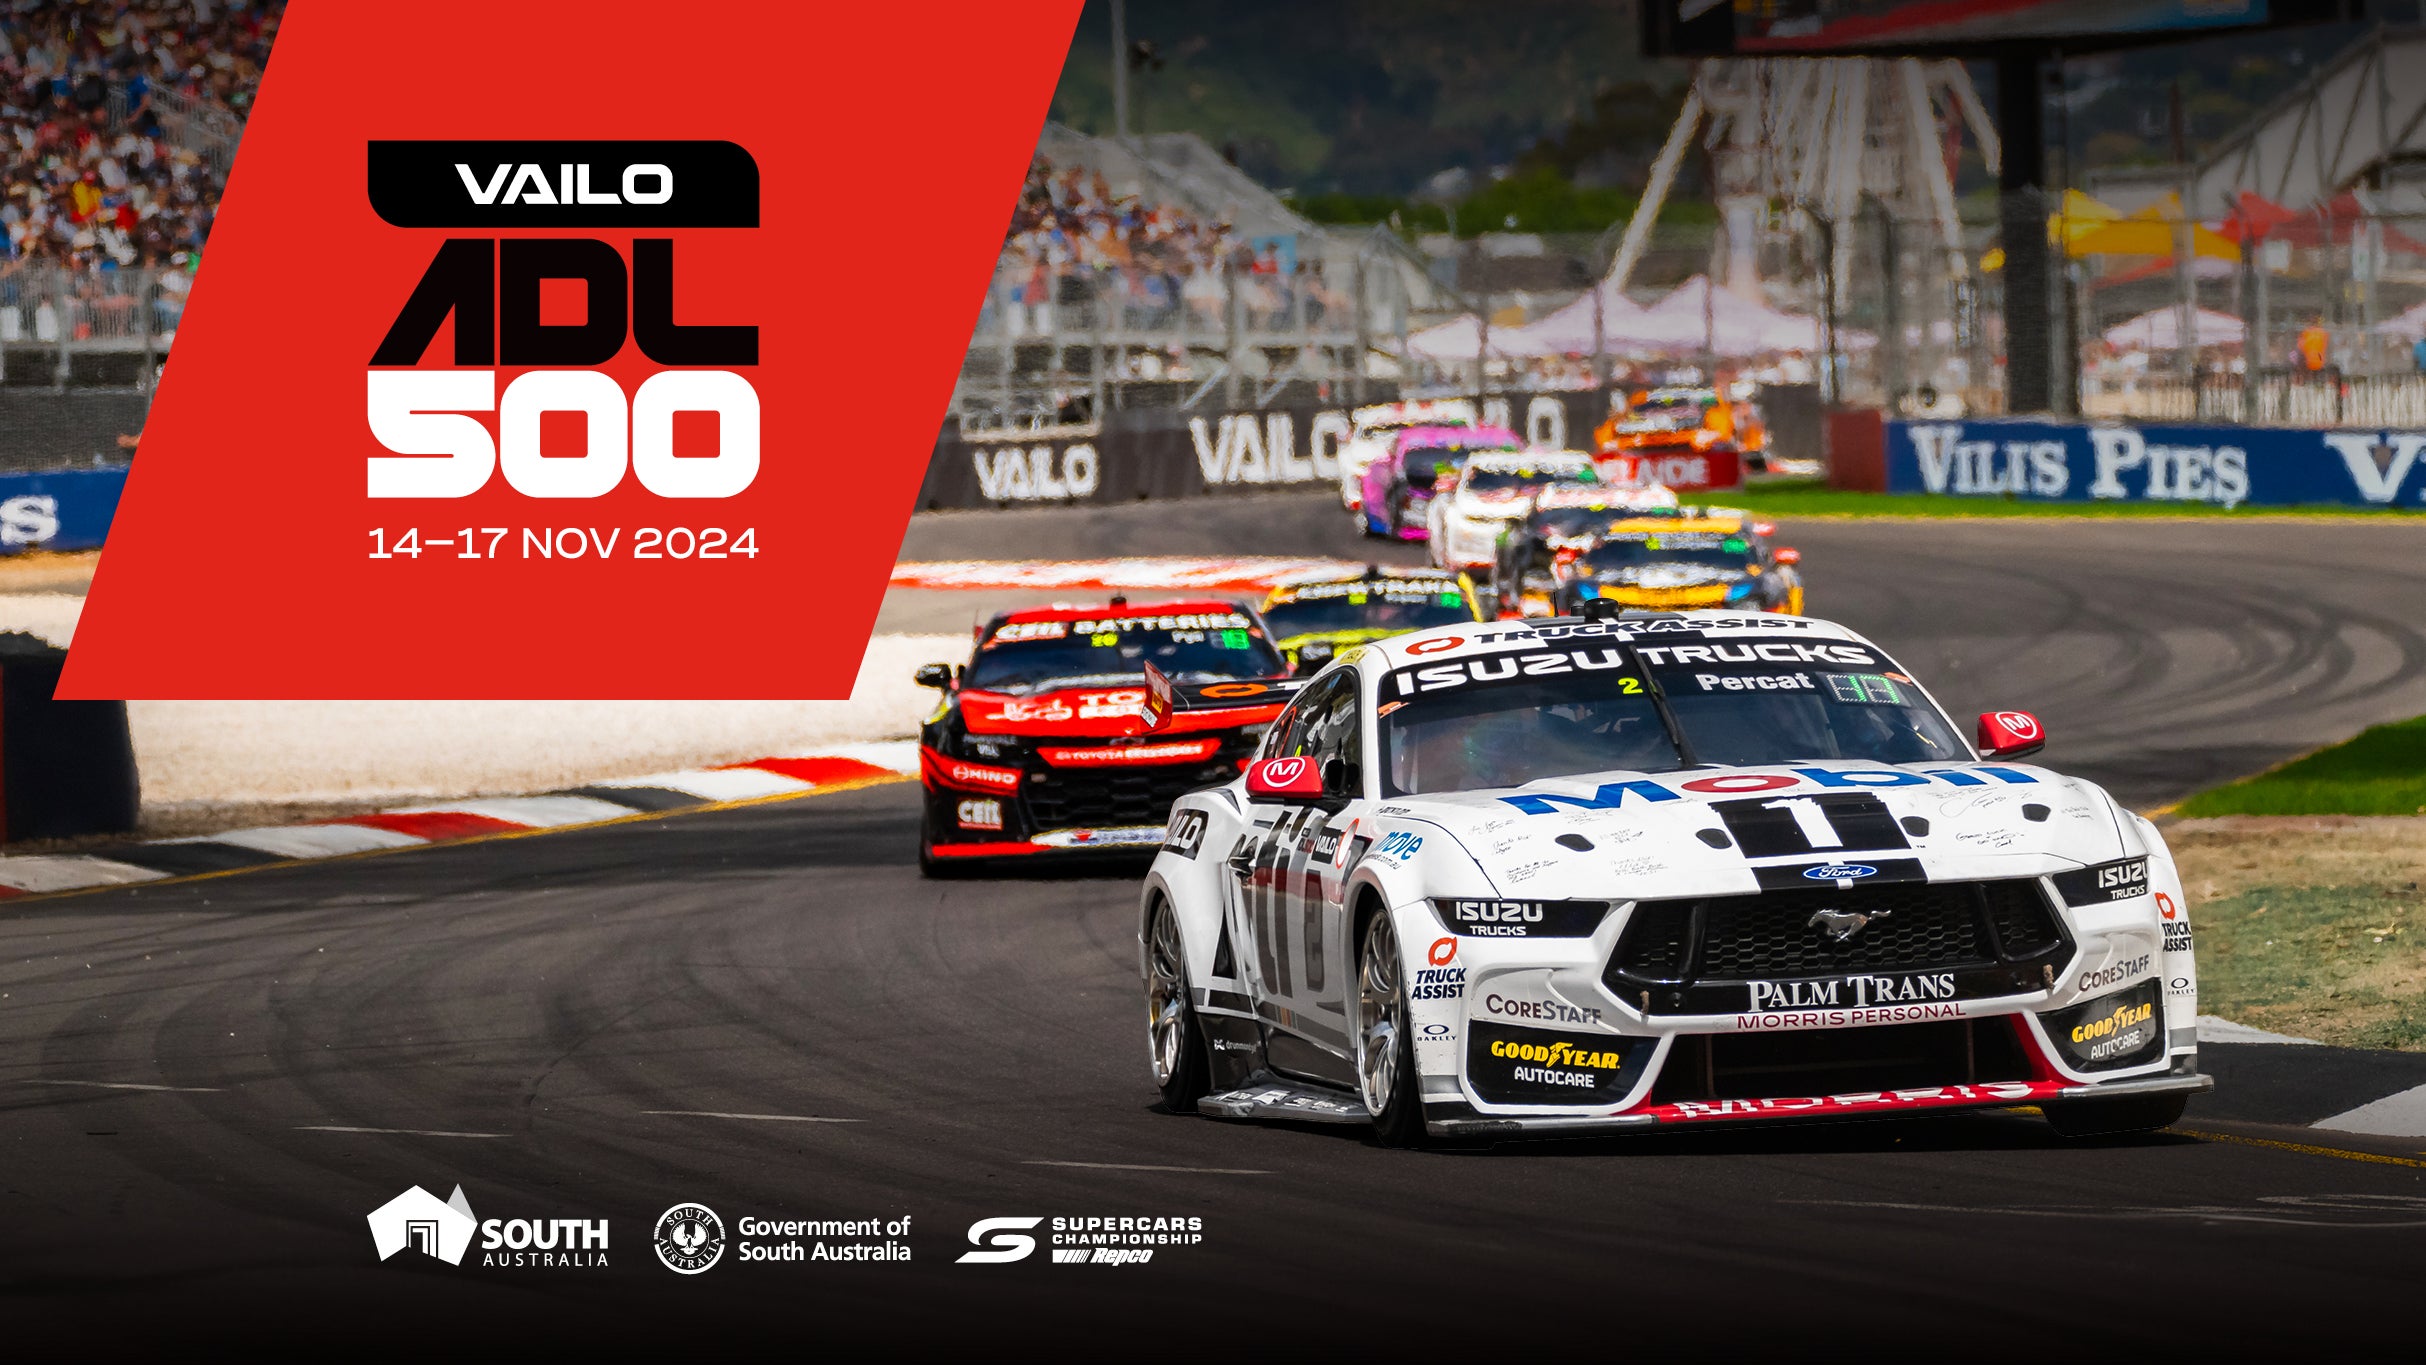 VAILO Adelaide 500 - Hairpin Grandstand Friday Entry